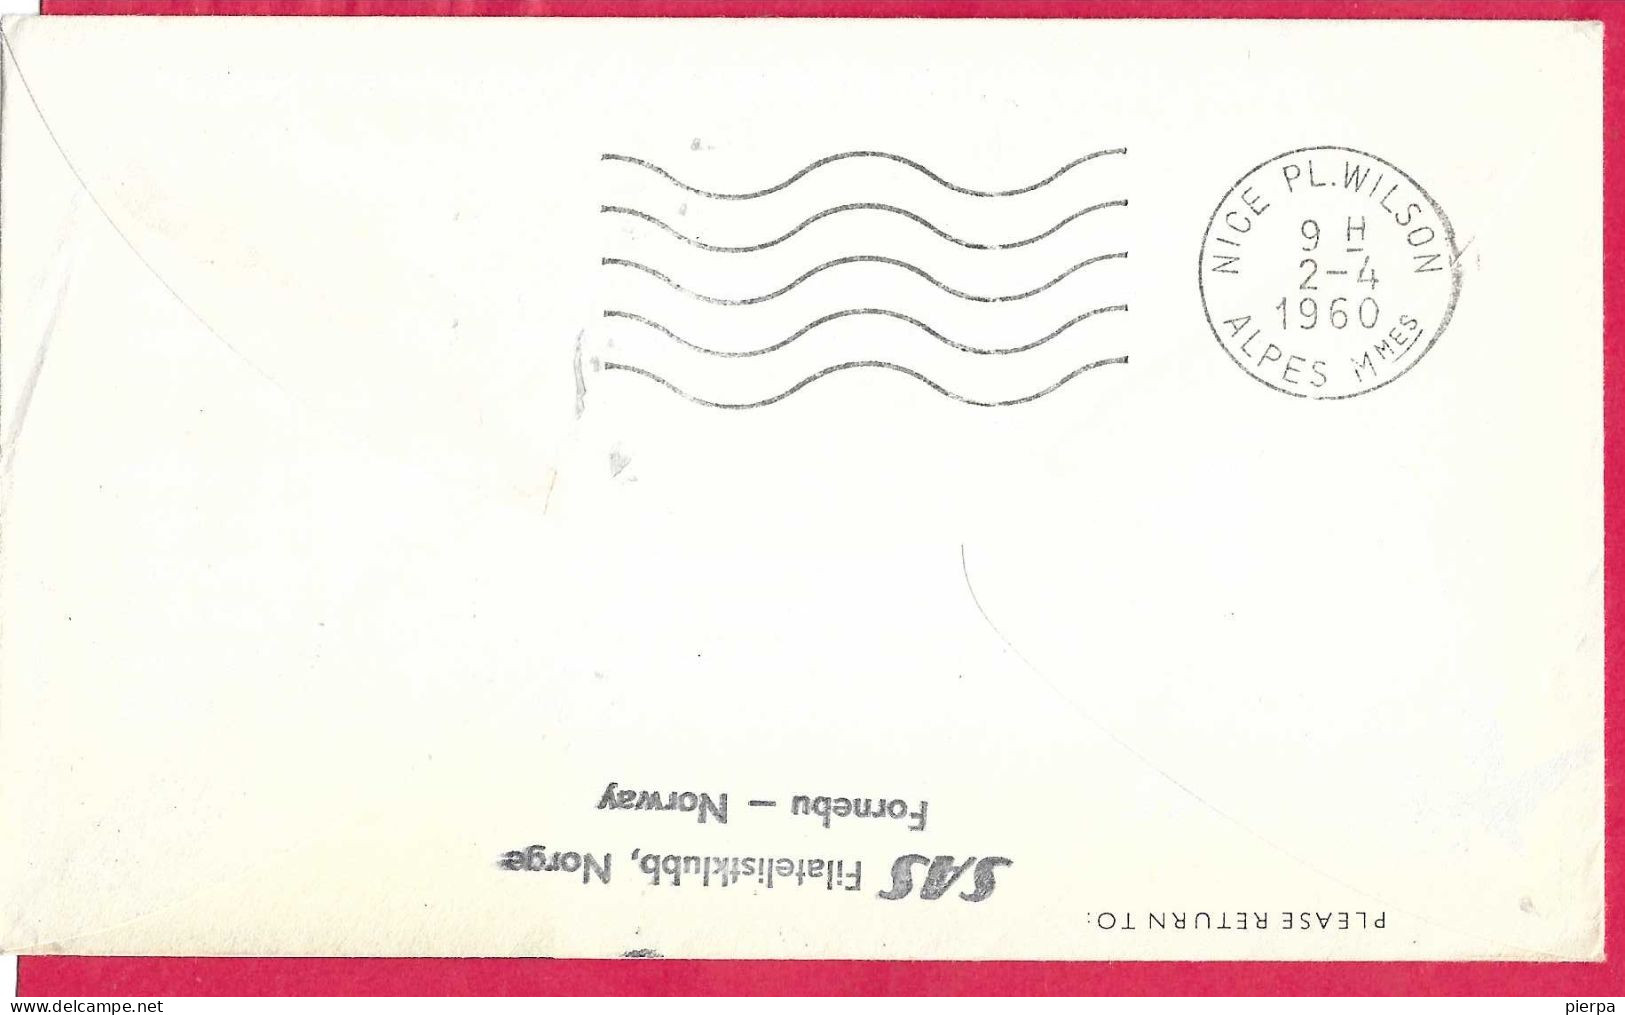 NORGE - FIRST CARAVELLE FLIGHT - SAS - FROM OSLO TO NICE *1.4.60* ON OFFICIAL COVER - Storia Postale